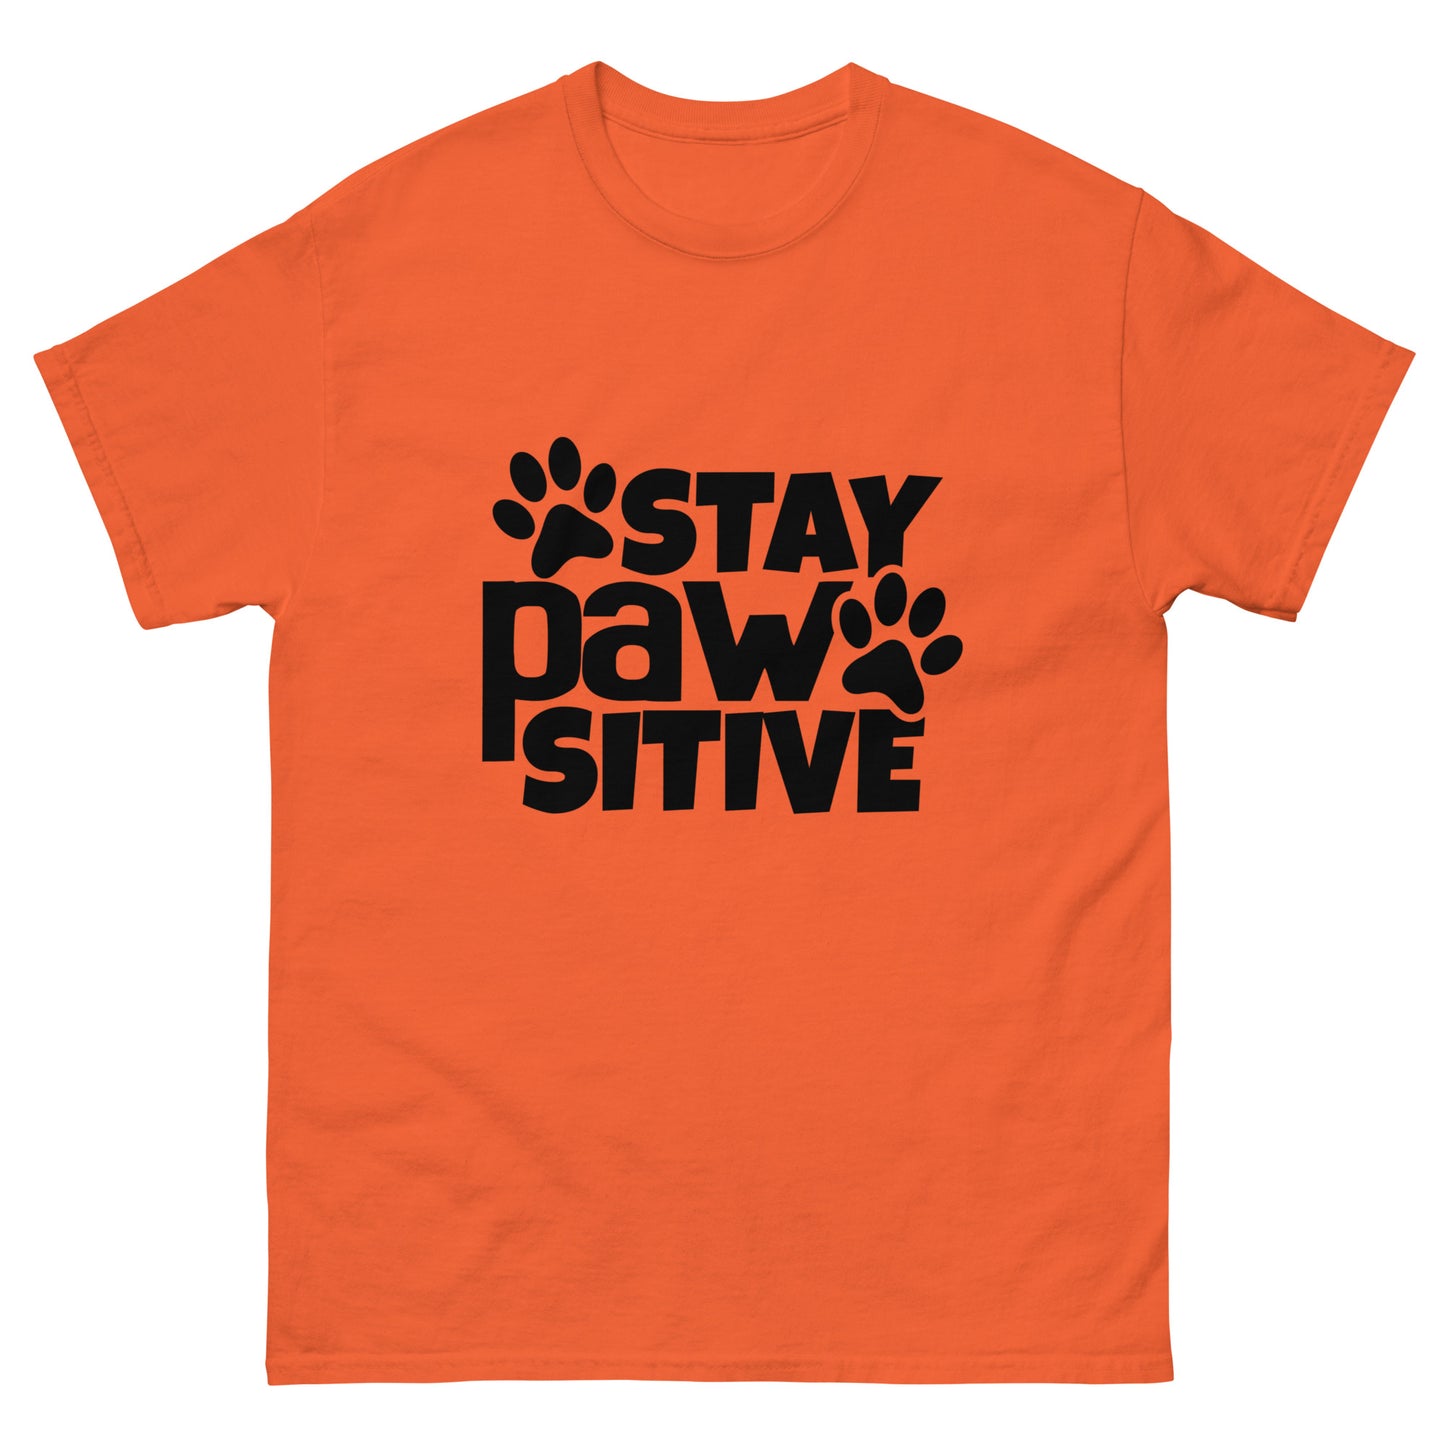 Stay Pawsitive - classic tee